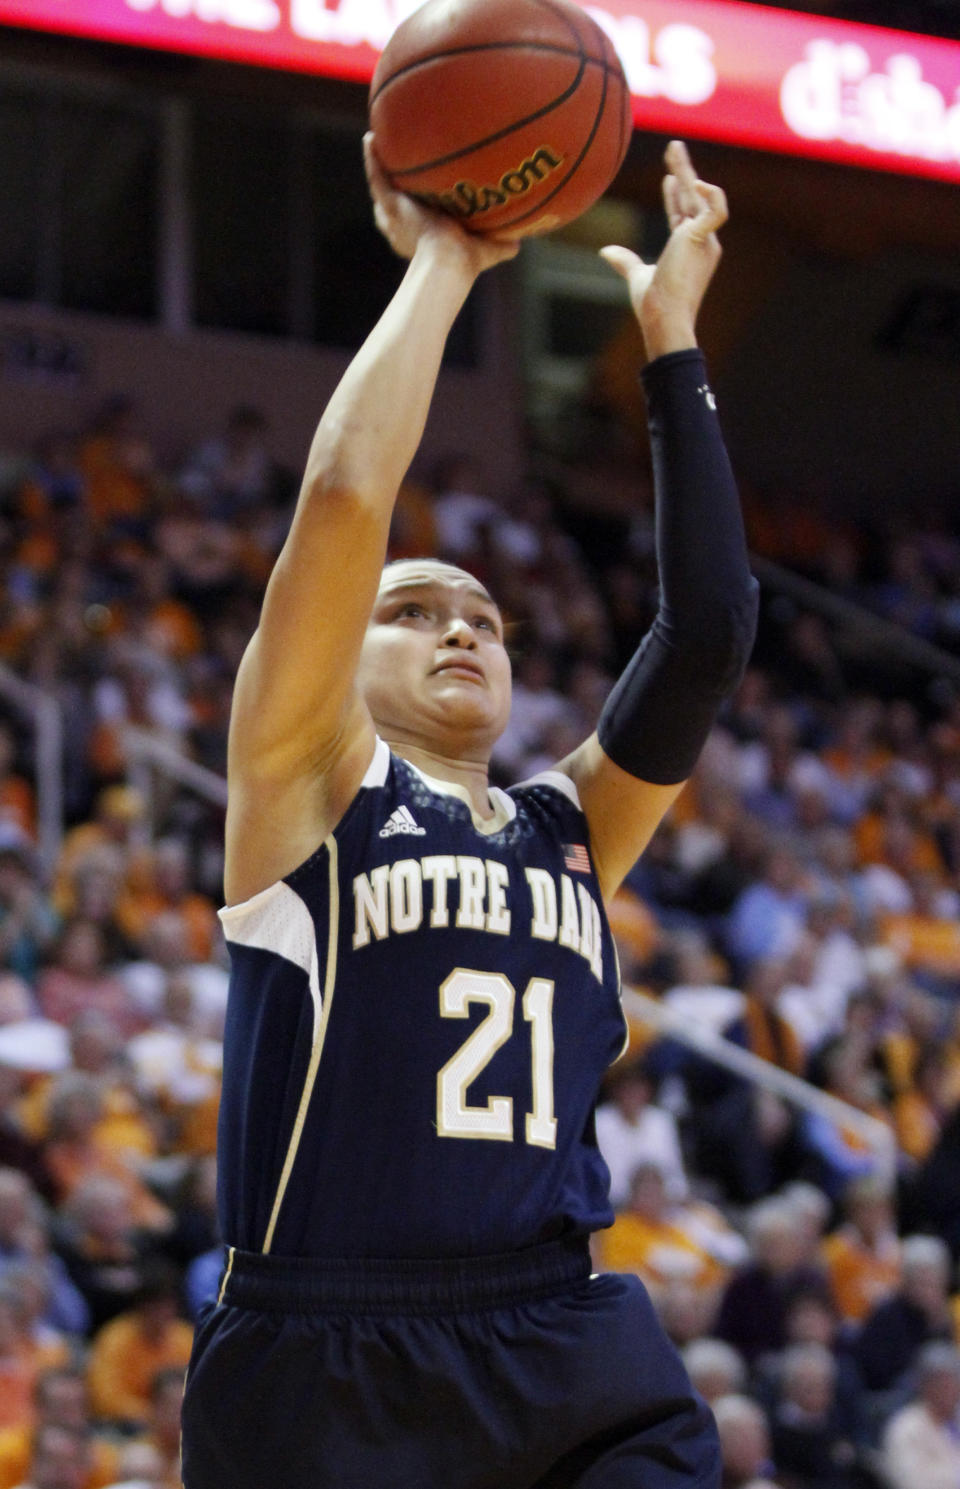 Notre Dame guard Kayla McBride (21) shoots in the second half of an NCAA college basketball game against Tennessee Monday, Jan. 20, 2014, in Knoxville, Tenn. Notre Dame won 86-70. (AP Photo/Wade Payne)